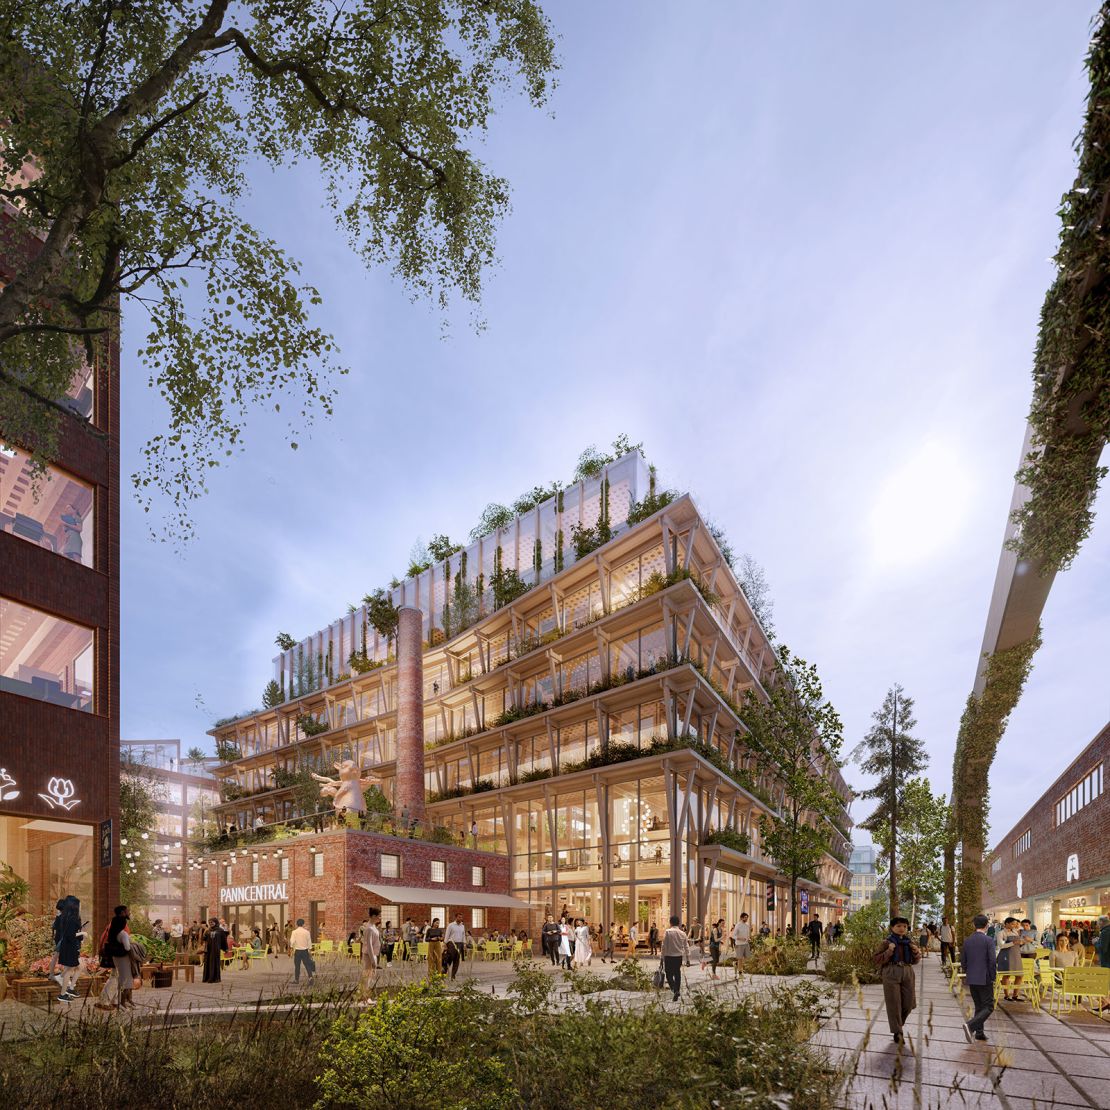 Artist renderings of Wood City, the world's largest urban construction project in wood.